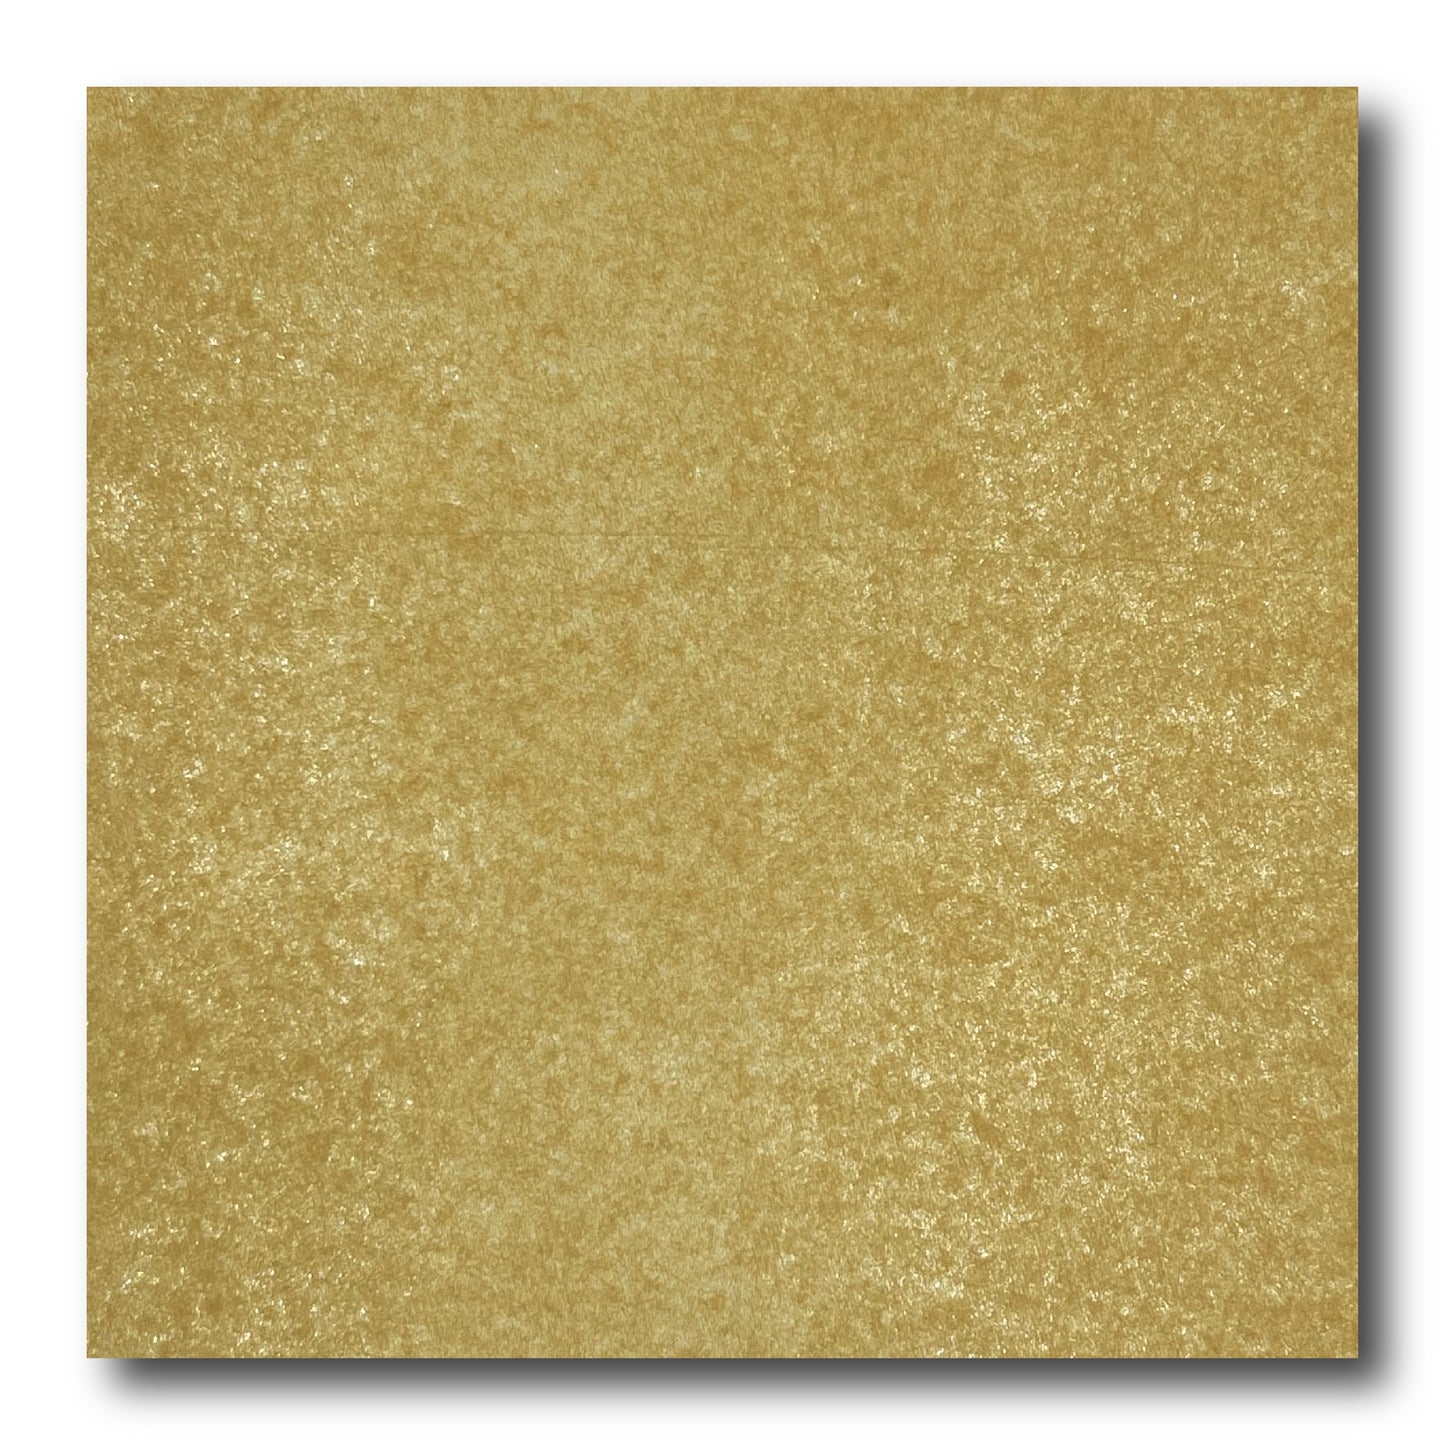 Double Tissue Foil Origami (Dual Color: Gold/Mustard) (Sold per sheet)